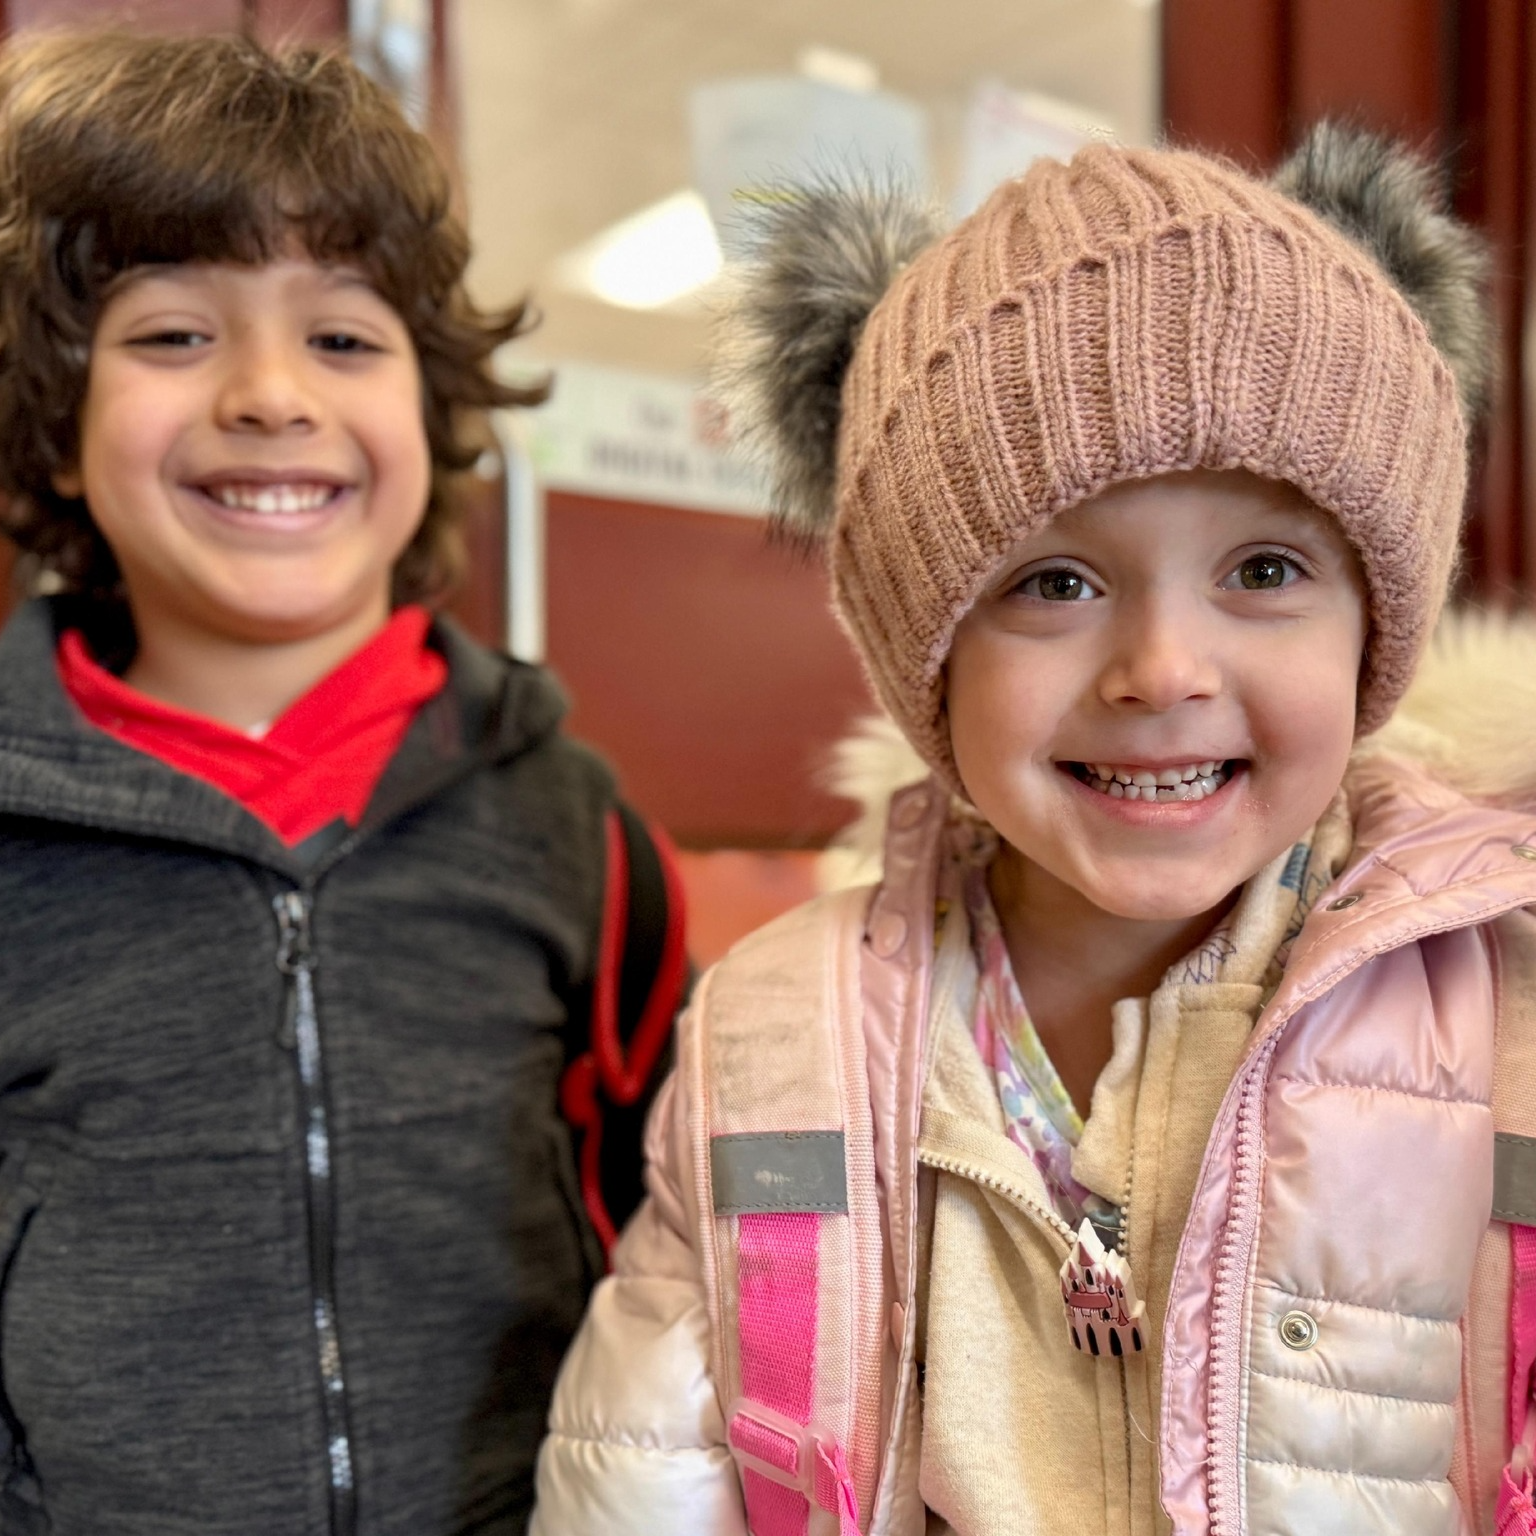 Young girl in jacket and pink hat and young boy in gray sweatshirt. Both are smiling.